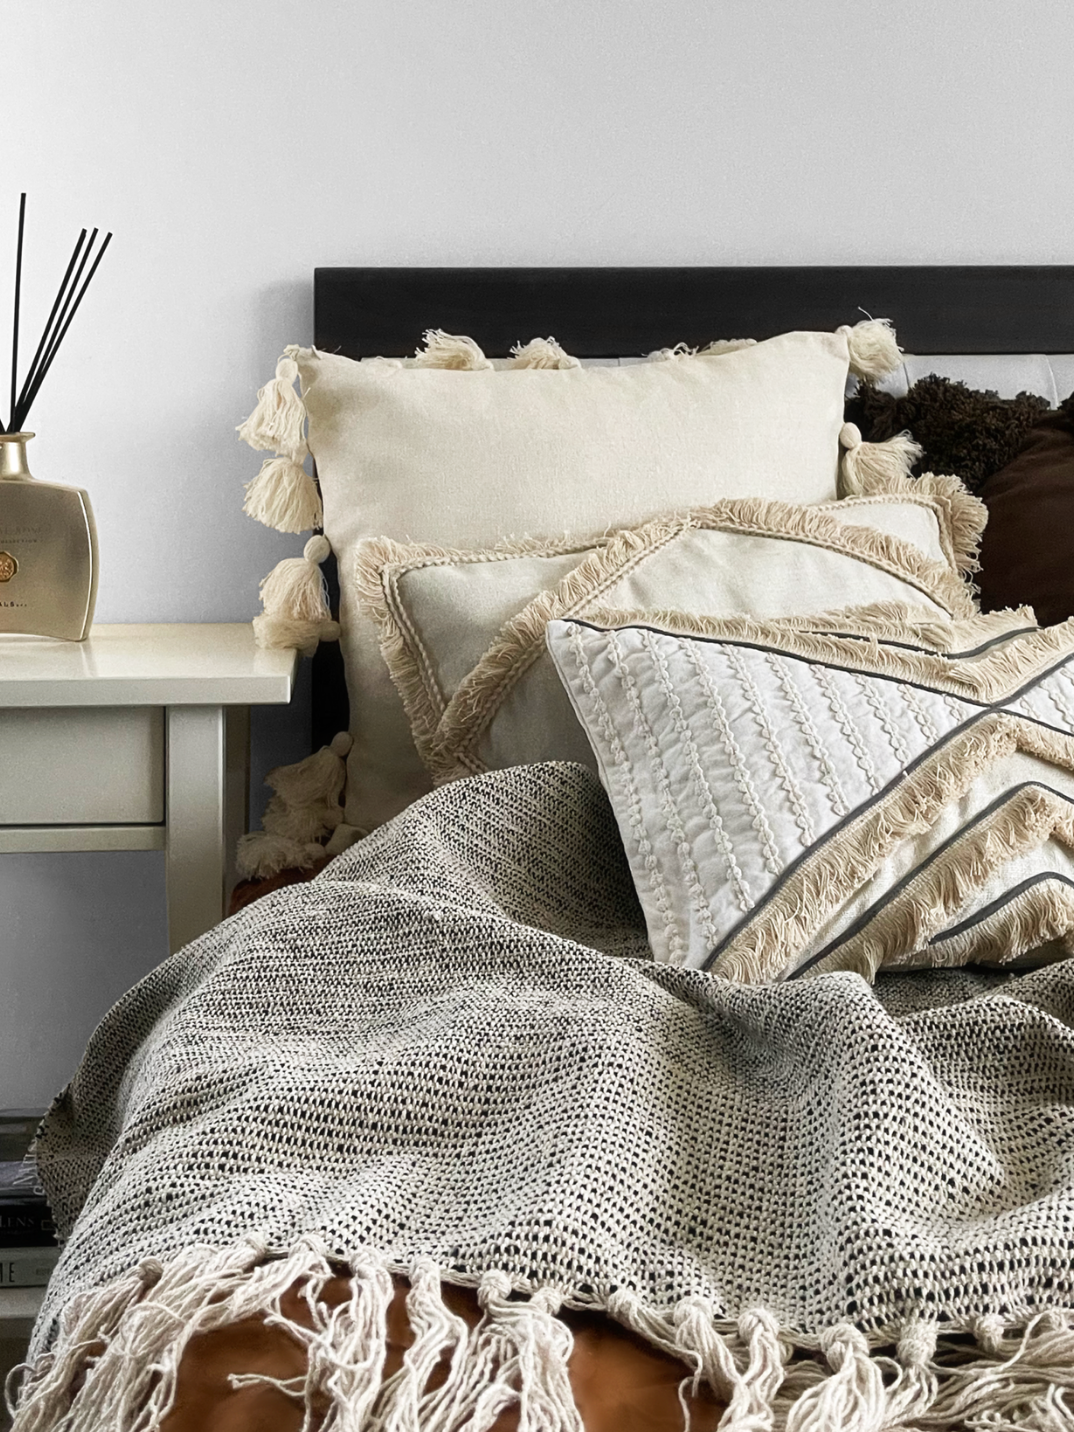 Give your living space a cozy warm feeling with our cotton slub throw. Ethically made in India